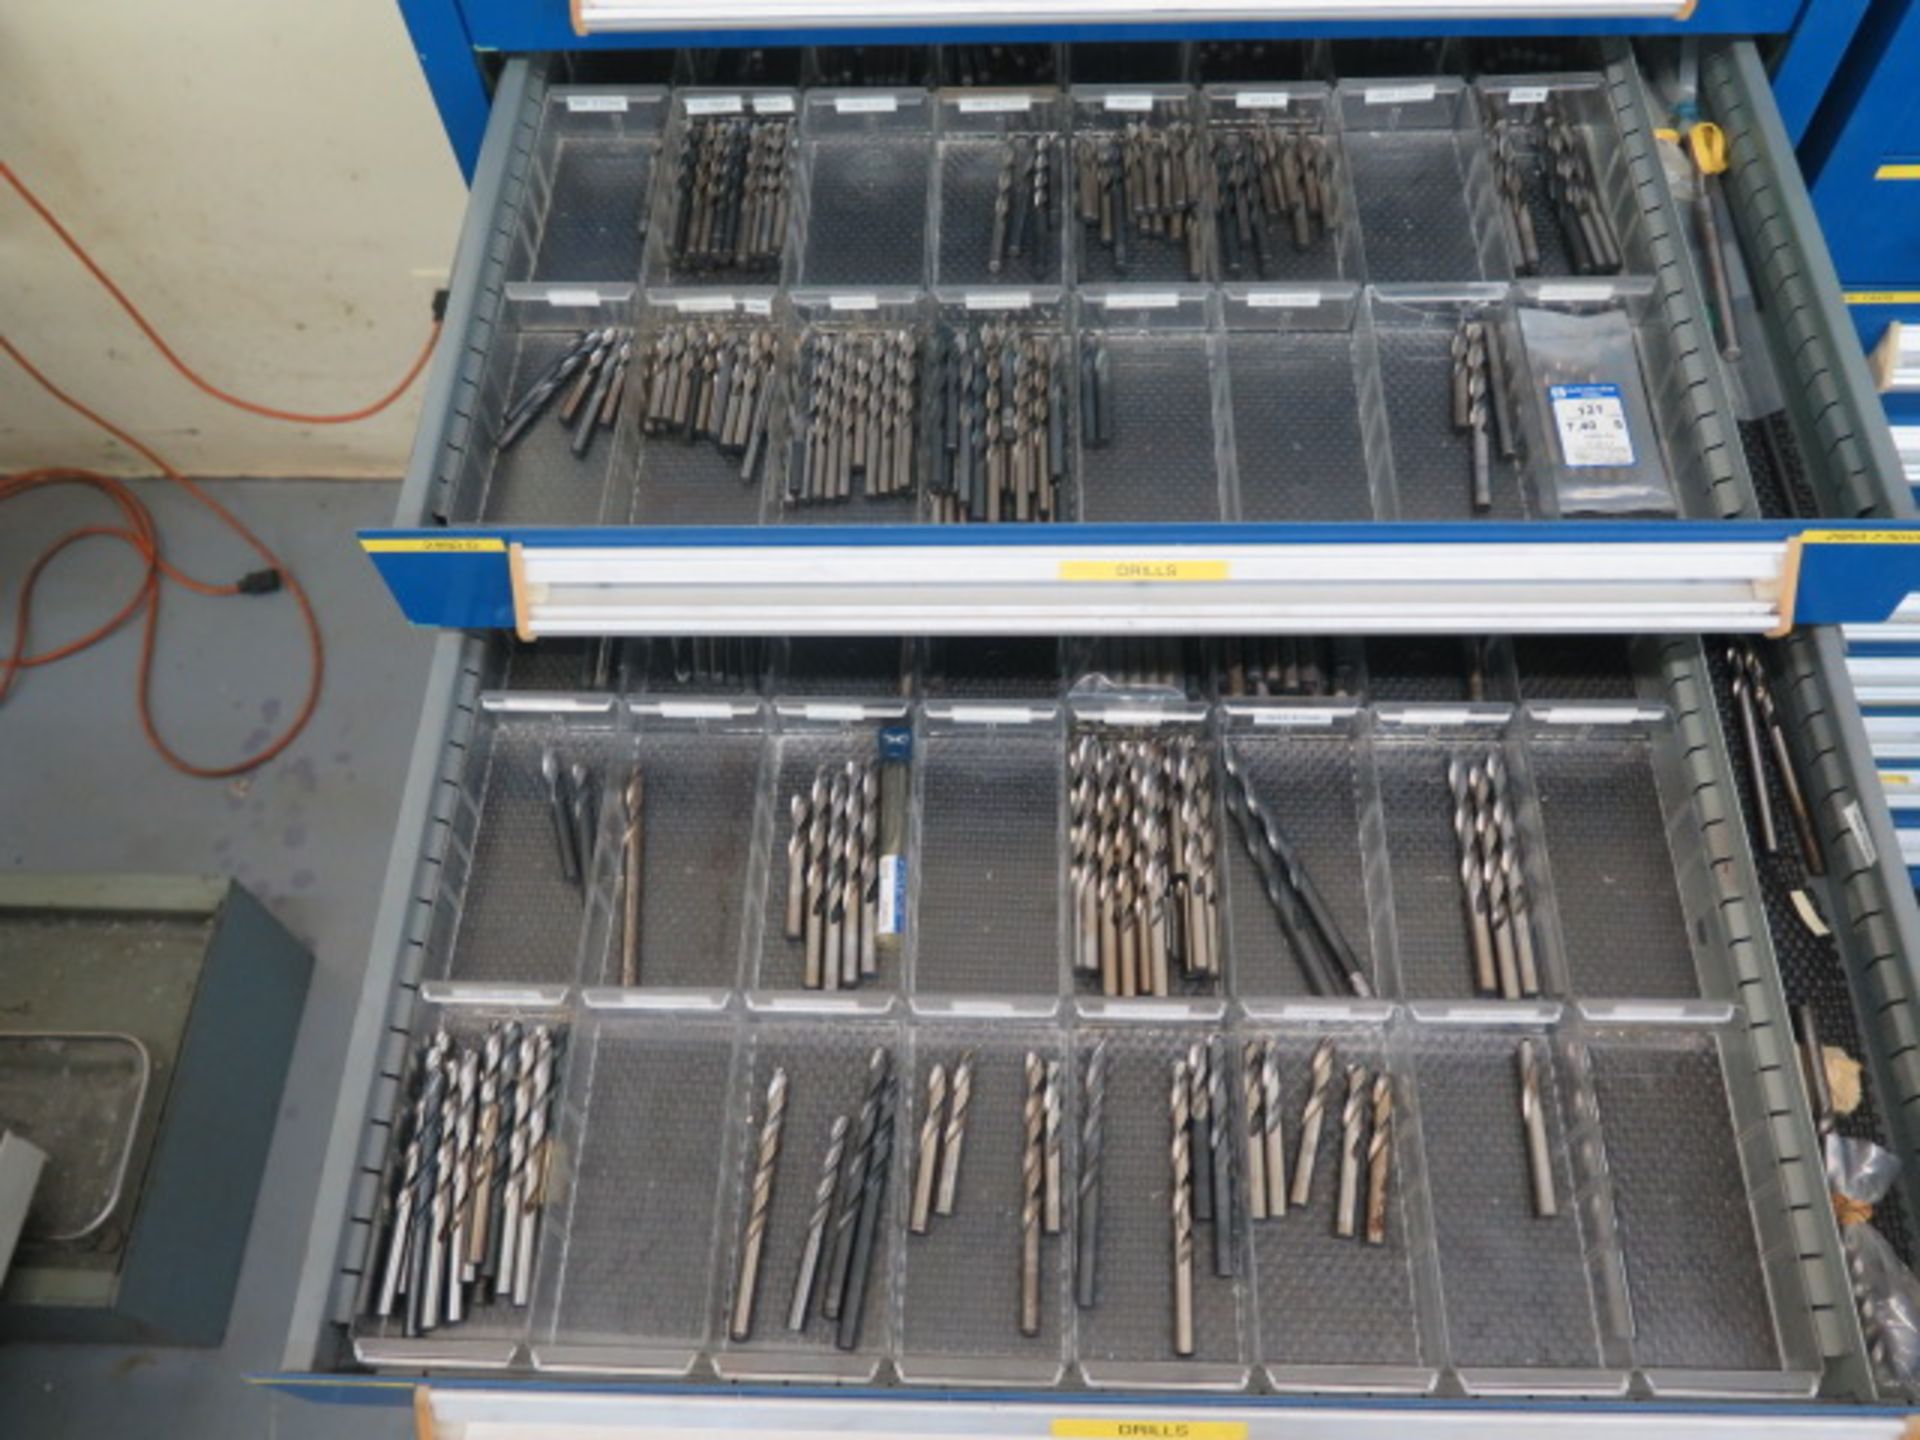 15-Drawer Rolling Tooling Cabinet w/ Drills - Image 2 of 9